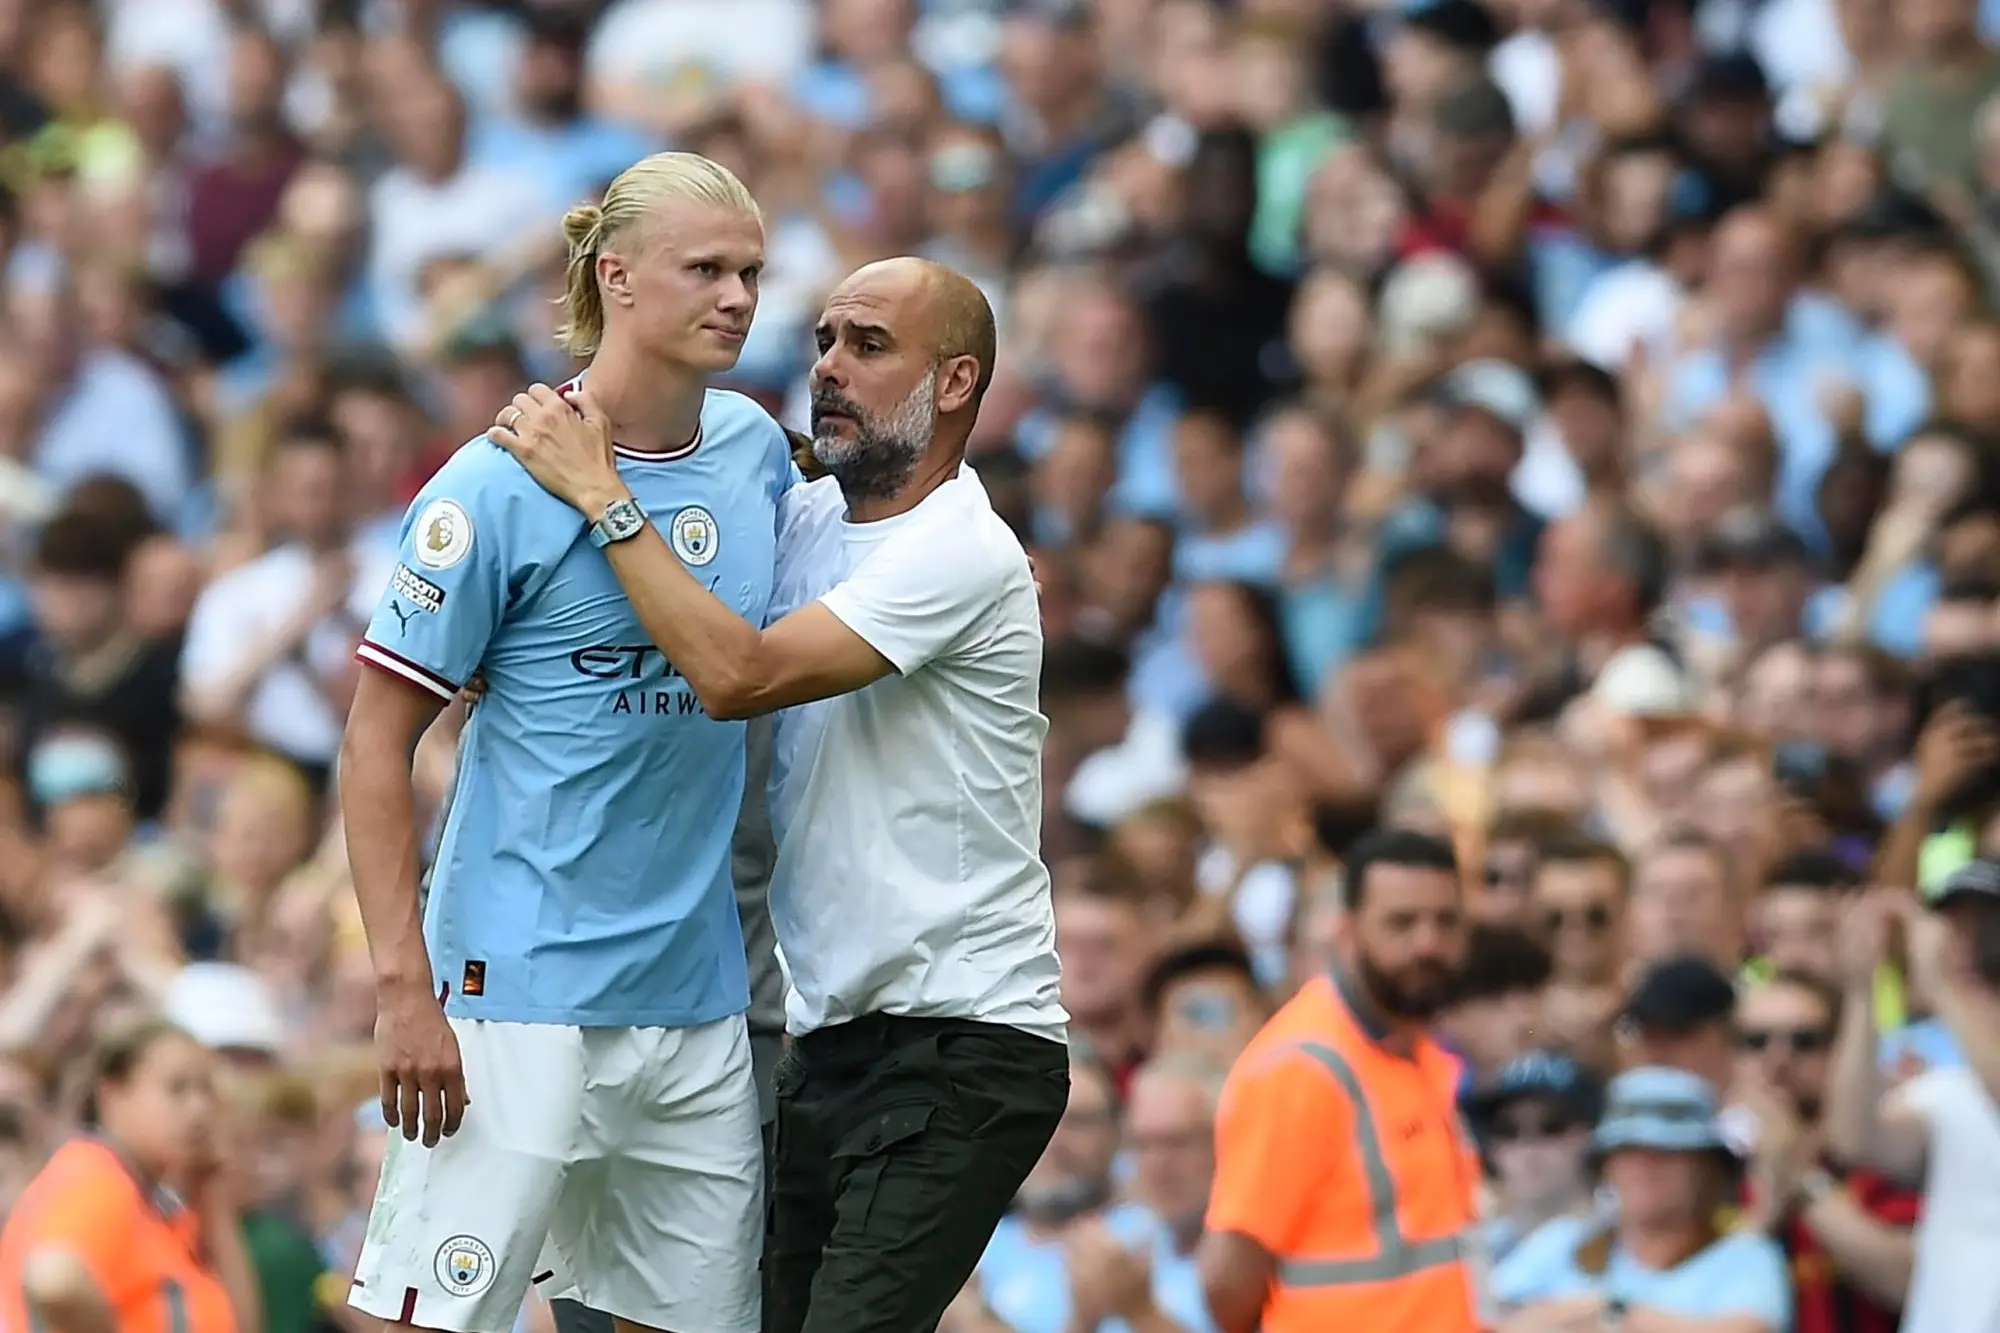 epa10118962 Manchester City manager Pep Guardiola (R) hugs his player Erling Haaland (L) after substitution during the English Premier League soccer match between Manchester City and AFC Bournemouth in Manchester, Britain, 13 August 2022. EPA/PETER POWELL EDITORIAL USE ONLY. No use with unauthorized audio, video, data, fixture lists, club/league logos or 'live' services. Online in-match use limited to 120 images, no video emulation. No use in betting, games or single club/league/player publications